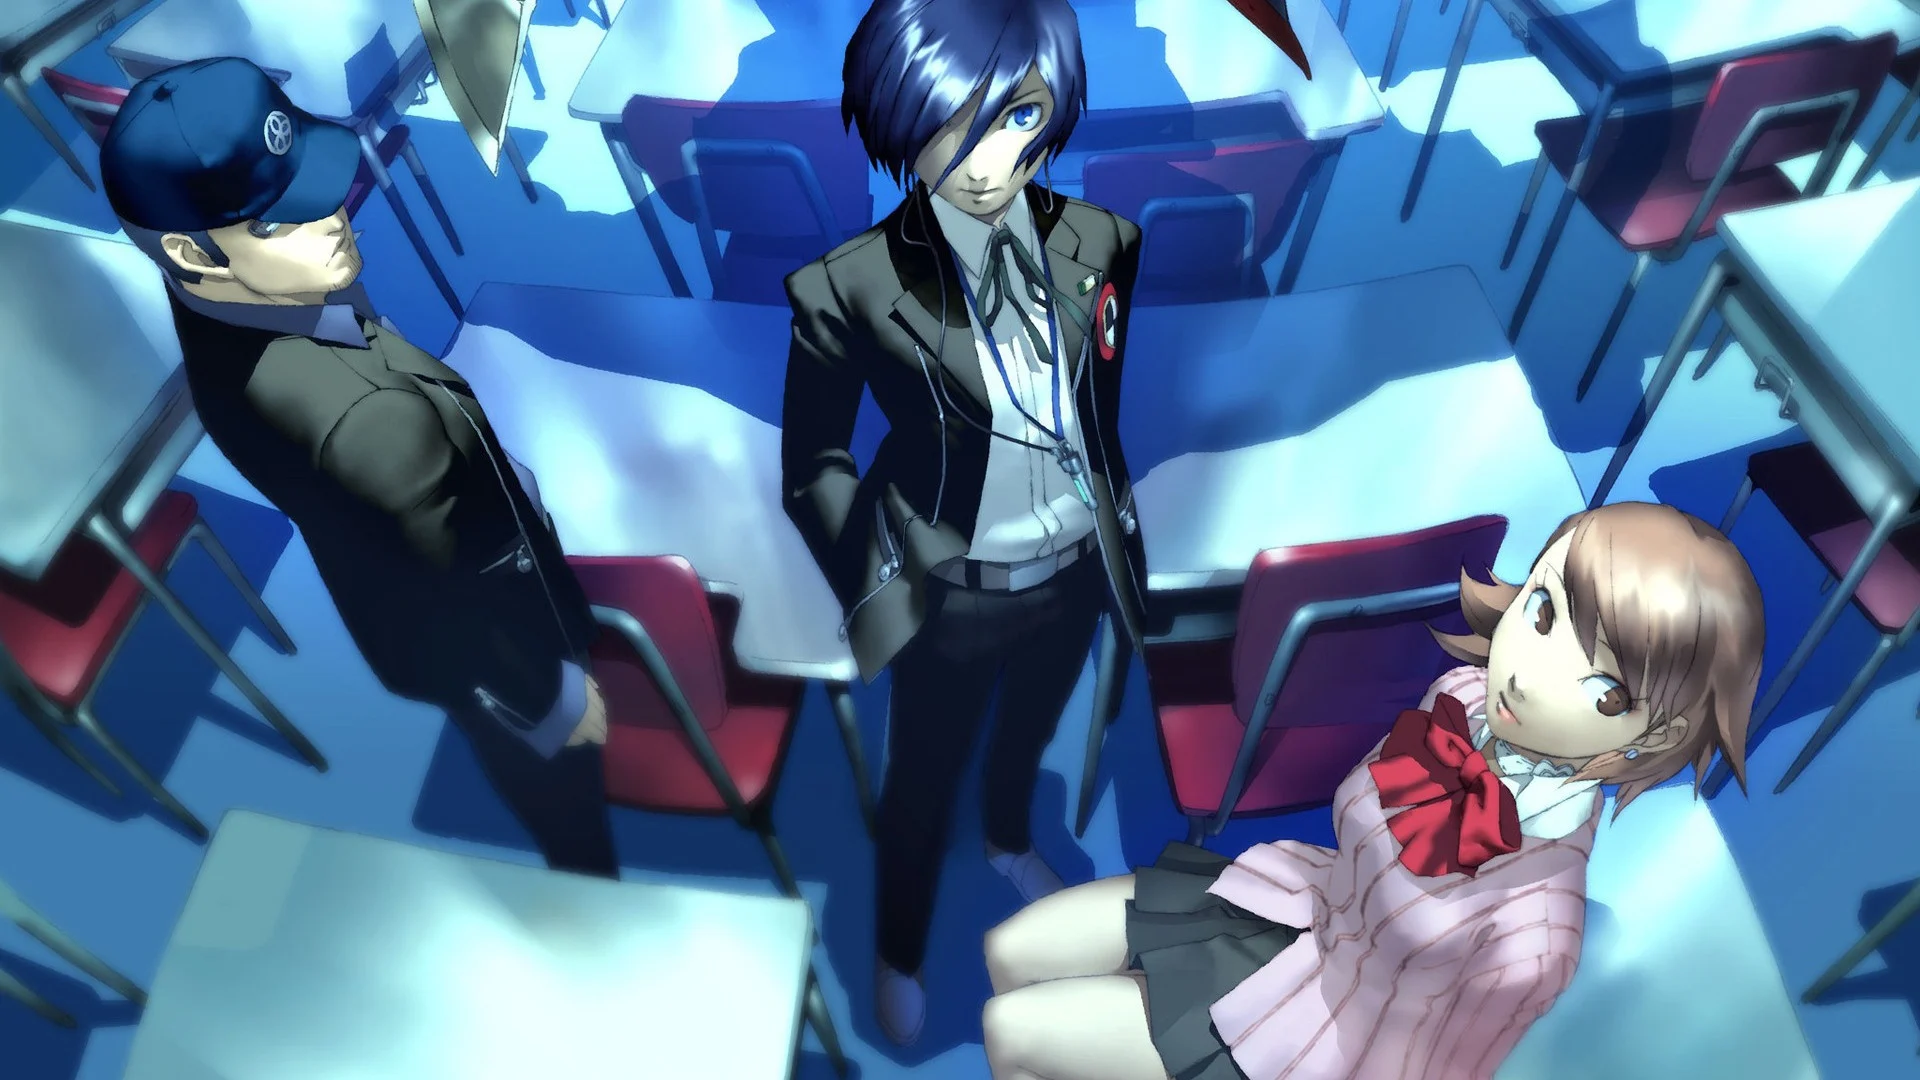 Persona 3 on PC: what we know about the port | PC Gamer